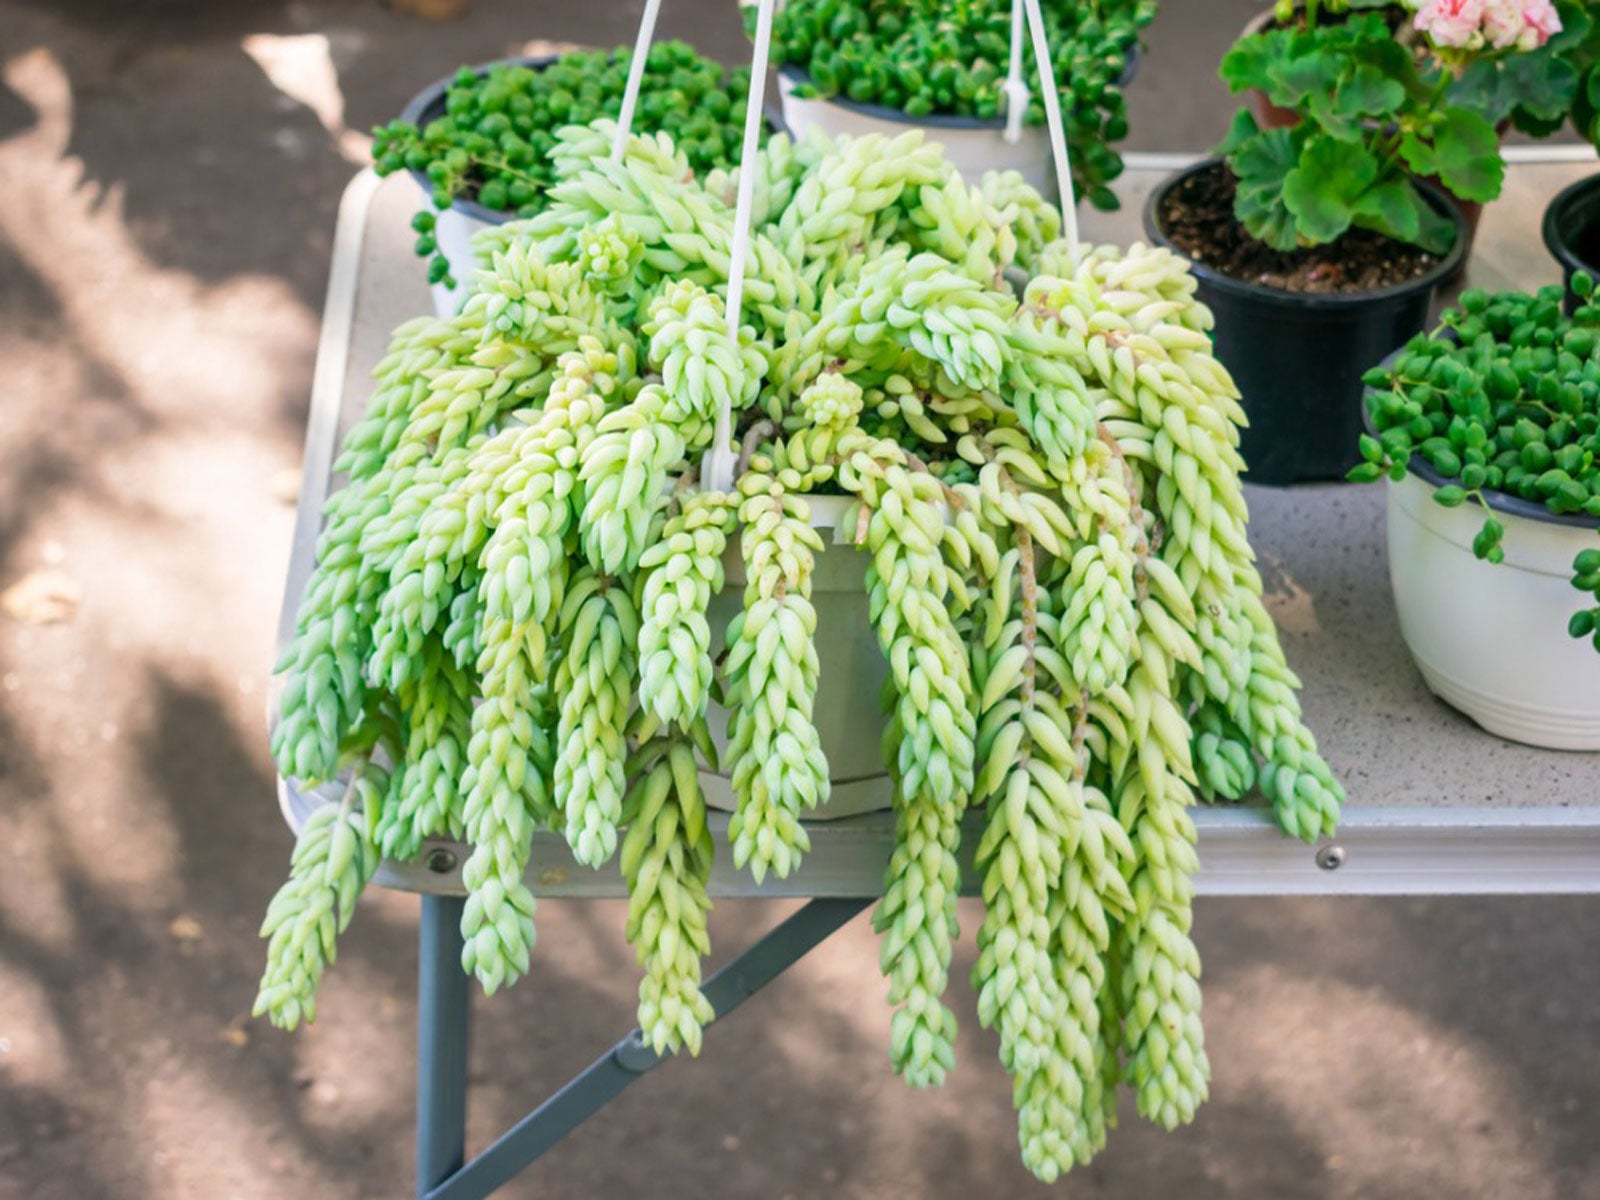 burro's tail houseplant: growing and caring for a burro's tail cactus